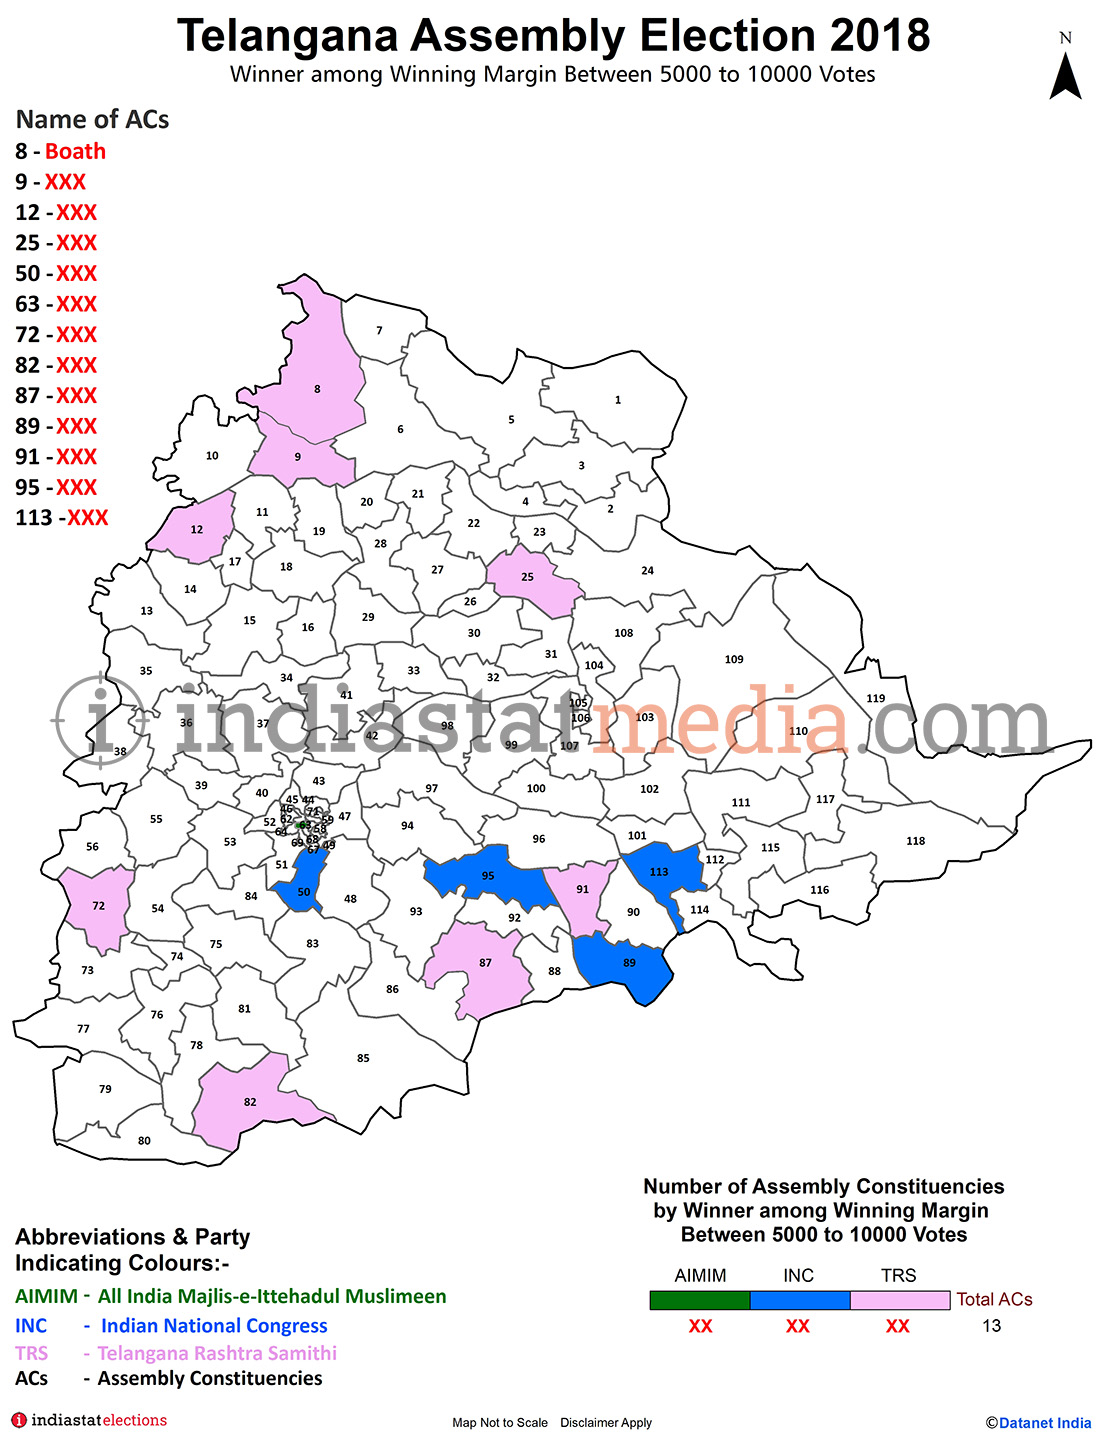 Winner among Winning Margin Between 5000 to 10000 Votes in Telangana (Assembly Election - 2018)